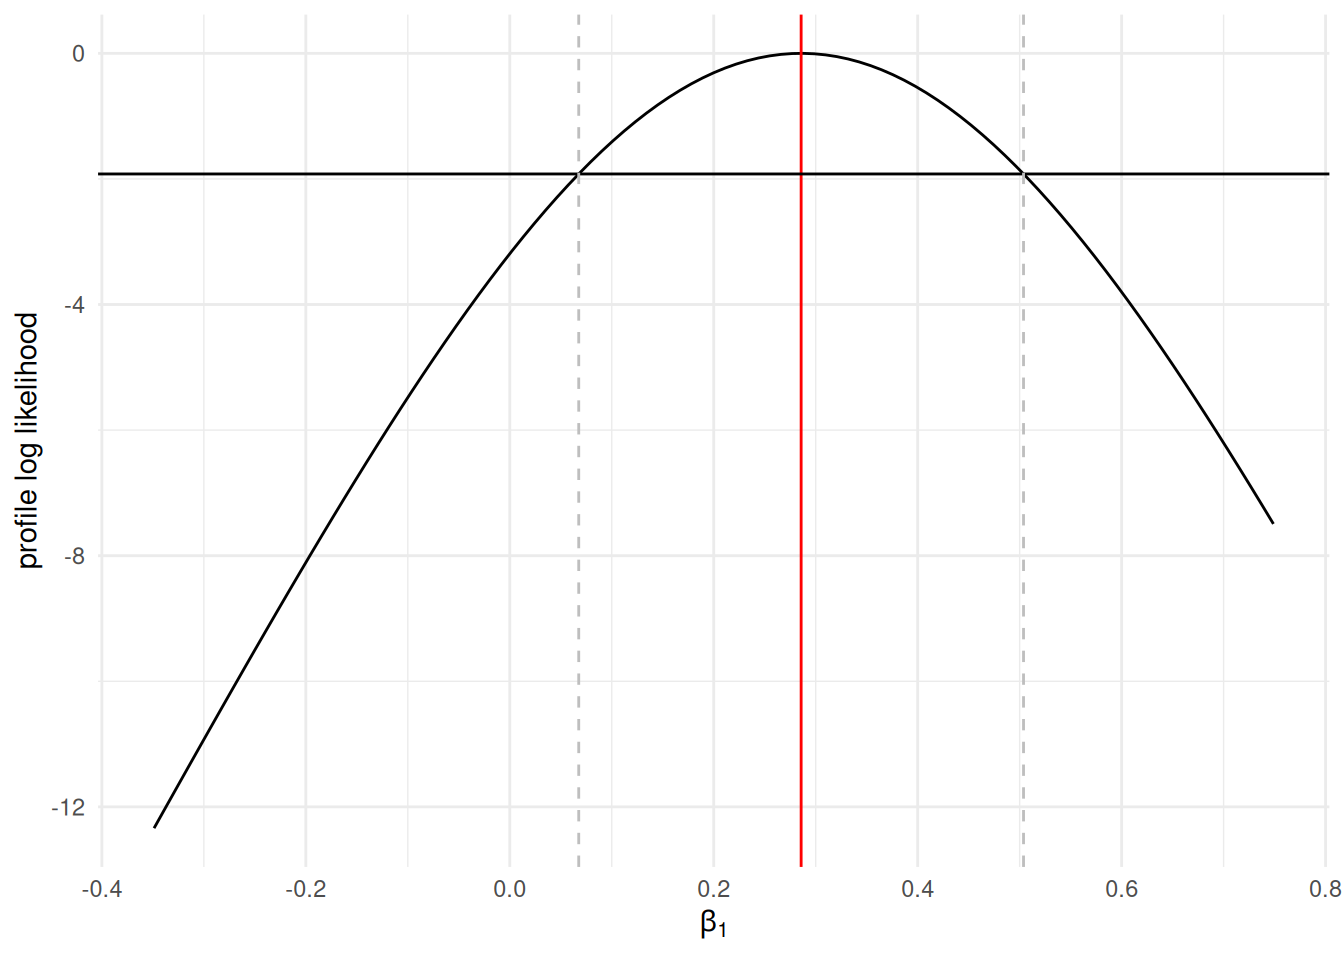 Profile log likelihood for $\beta_1$ in the simple linear regression model for simulated data. The function has been so its value at the maximum likelihood estimate is zero. The horizontal cutoff marks minus half the $0.95$ quantile of the $\chi^2_1$ distribution, with vertical lines indicating the maximum likelihood estimate (red) and 95\% confidence interval (dashed gray). Because of the normality assumption of the linear regression model, the sampling distribution is exactly normally distribution, the profile is symmetric and the Wald and profile likelihood ratio based confidence intervals agree.